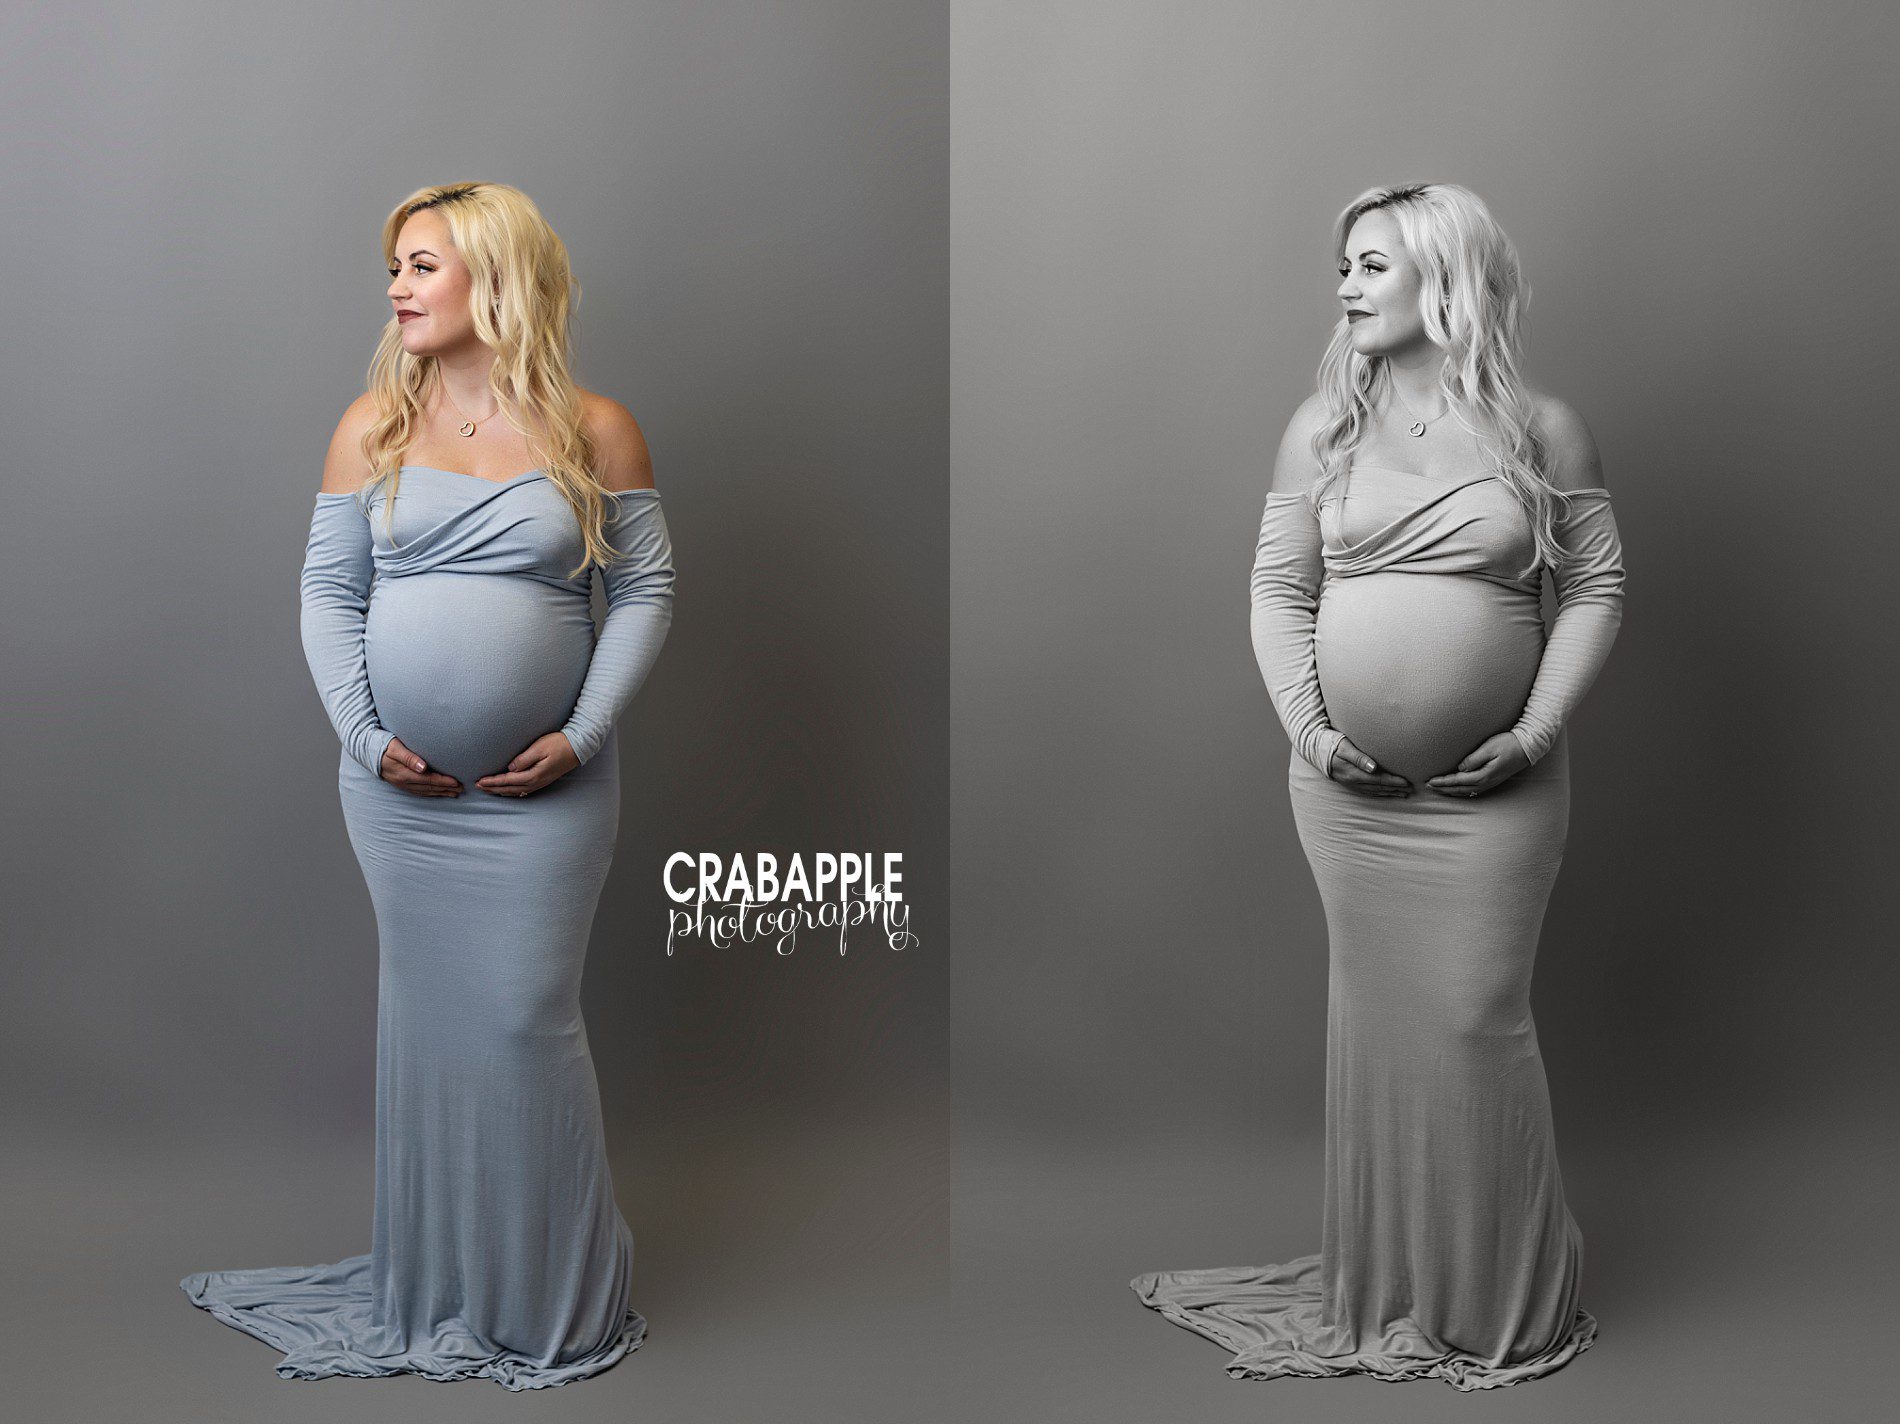 color vs black and white for maternity photos